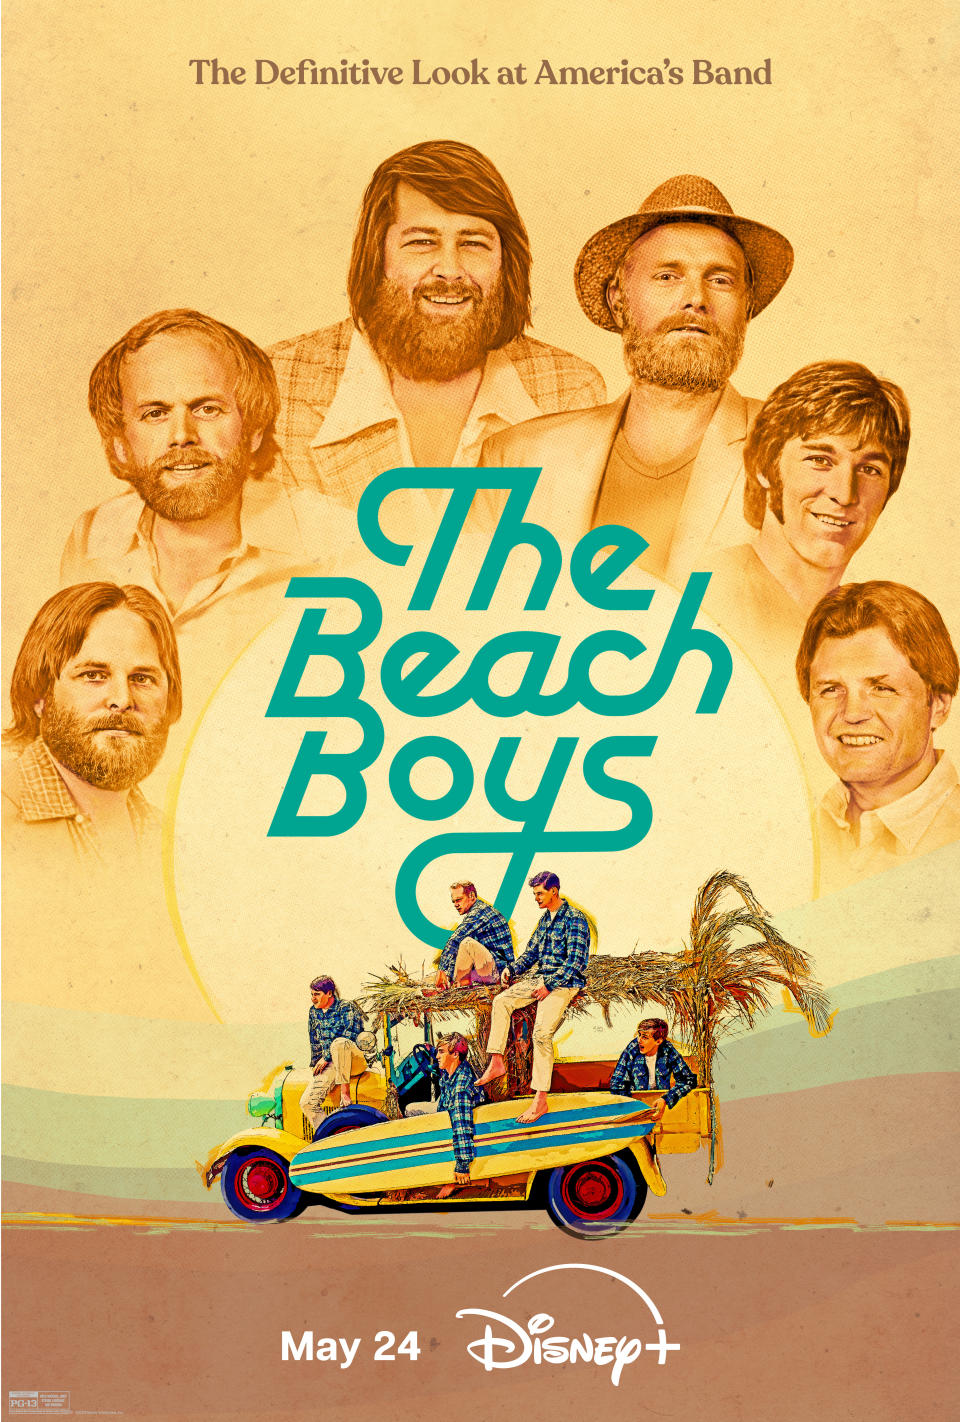 The Beach Boys, amid a dune-buggy surfing setting, in a graphic for the new documentary about them. The words at top read: The Definitive Look at America's Band.